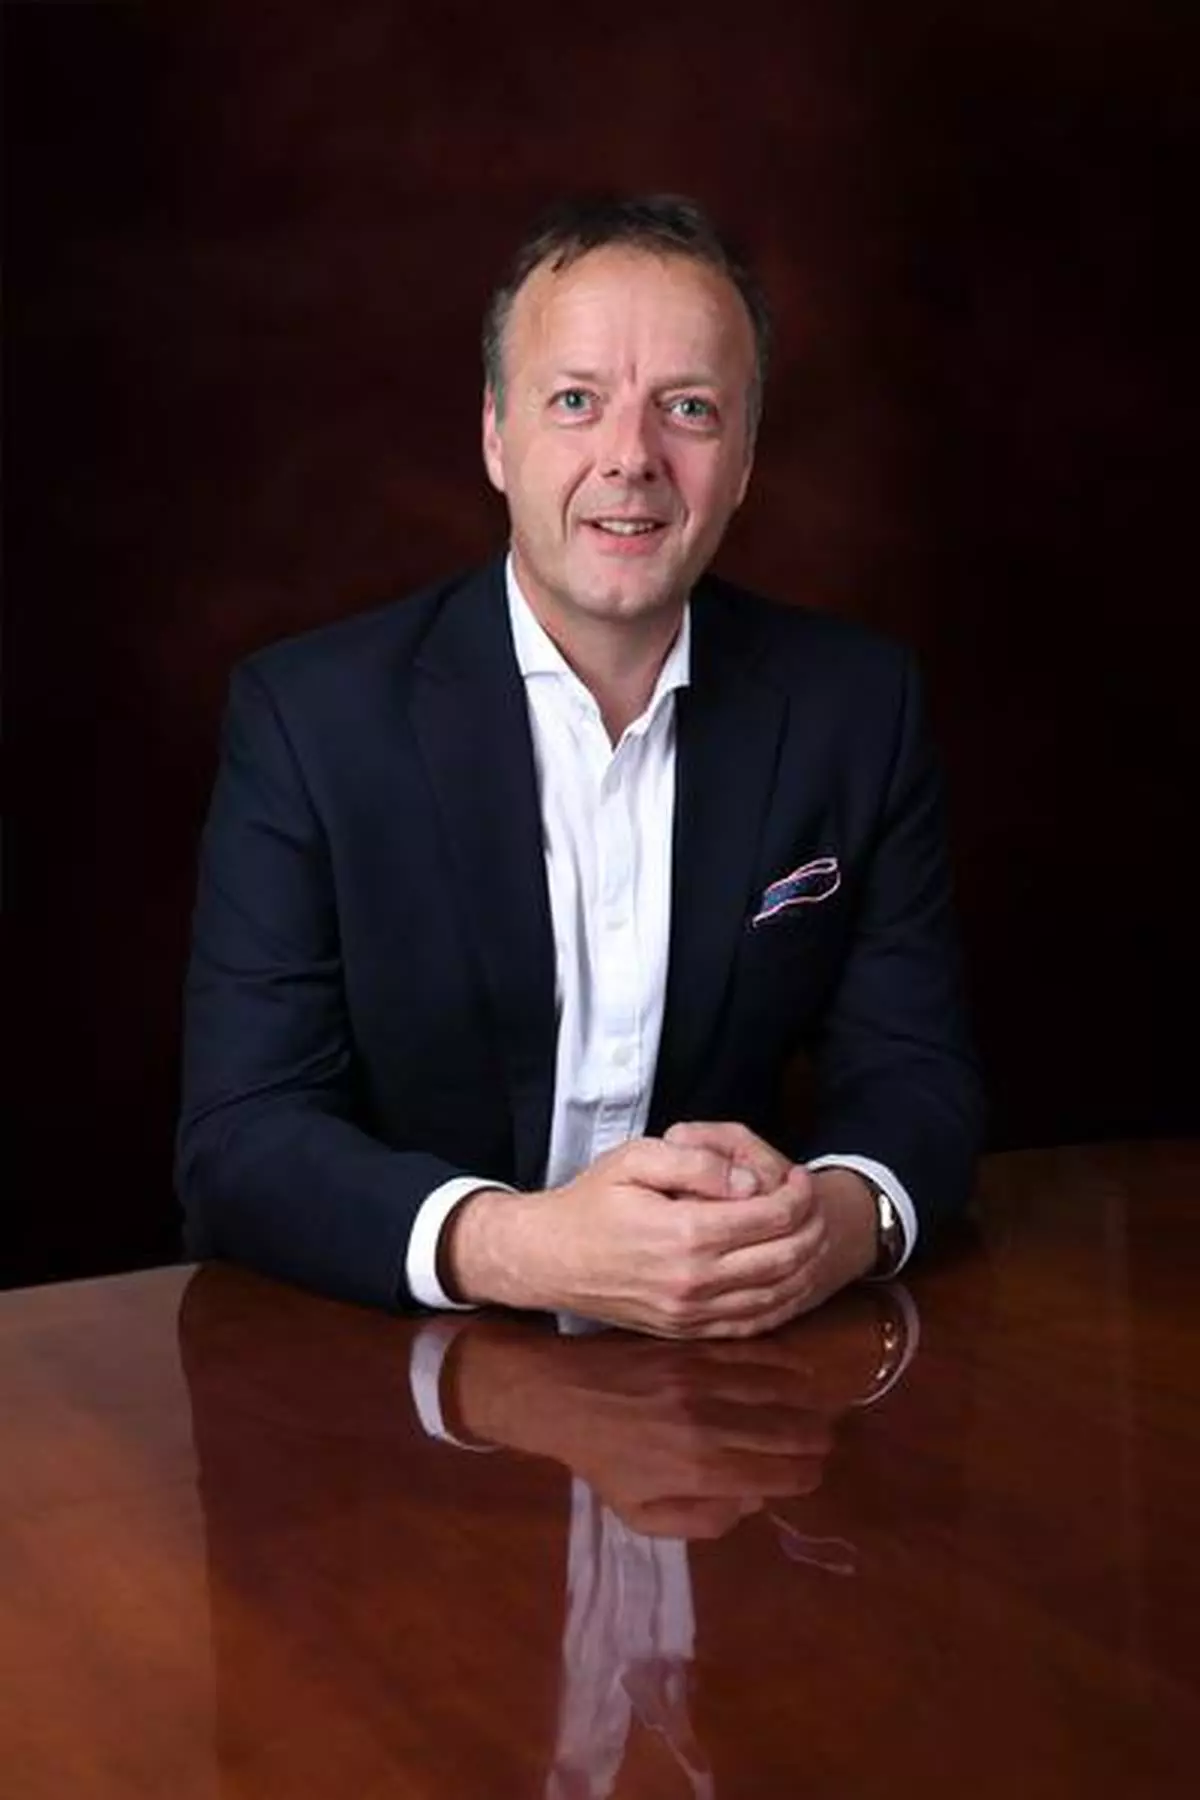 File photo: Jonathan Hunt, Managing Director and Chief Executive Officer, Syngene International Limited